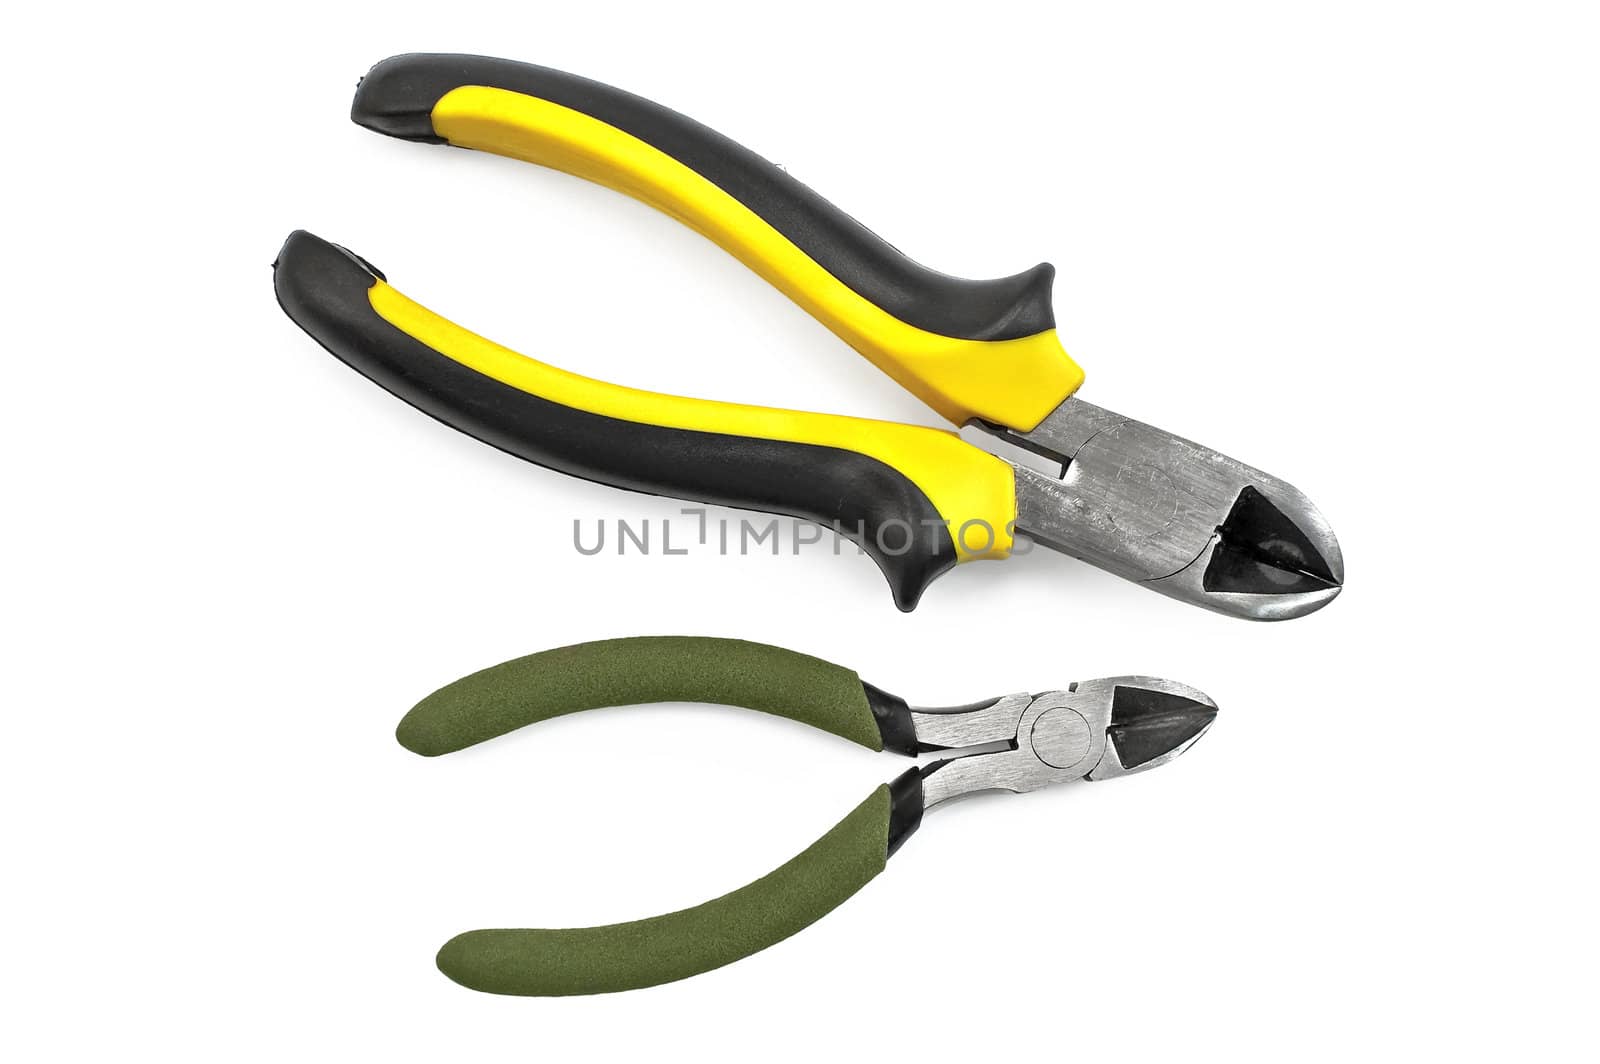 Two cutter with a yellow-black and green rubber handles isolated on a white background